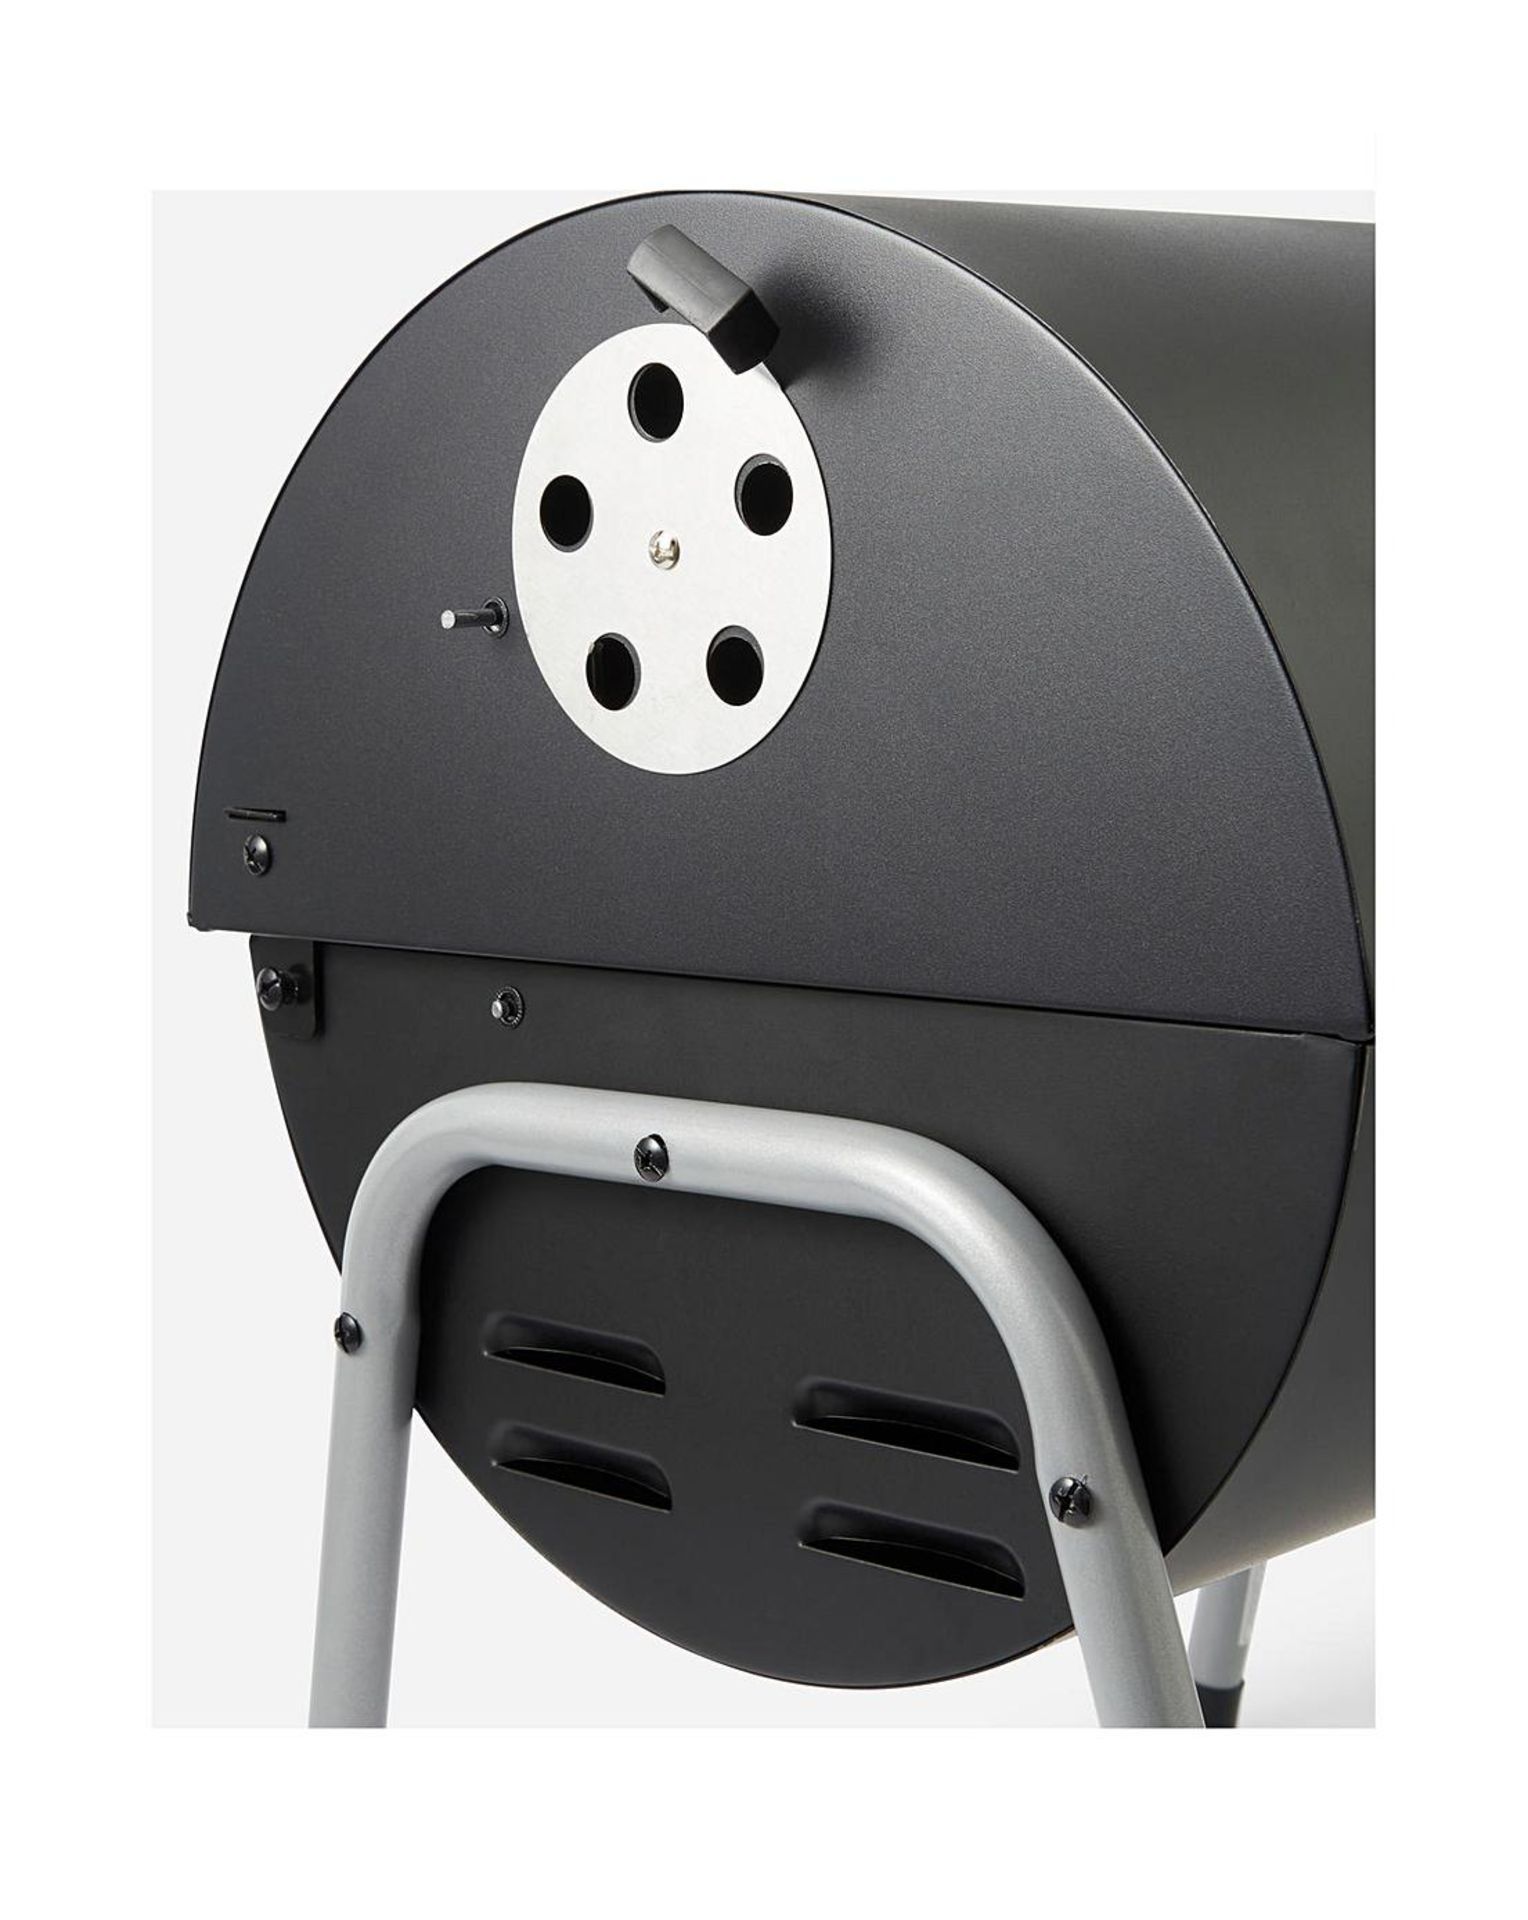 BRAND NEW CHARCOAL OIL DRUM BBQ R15-7 - Image 4 of 4